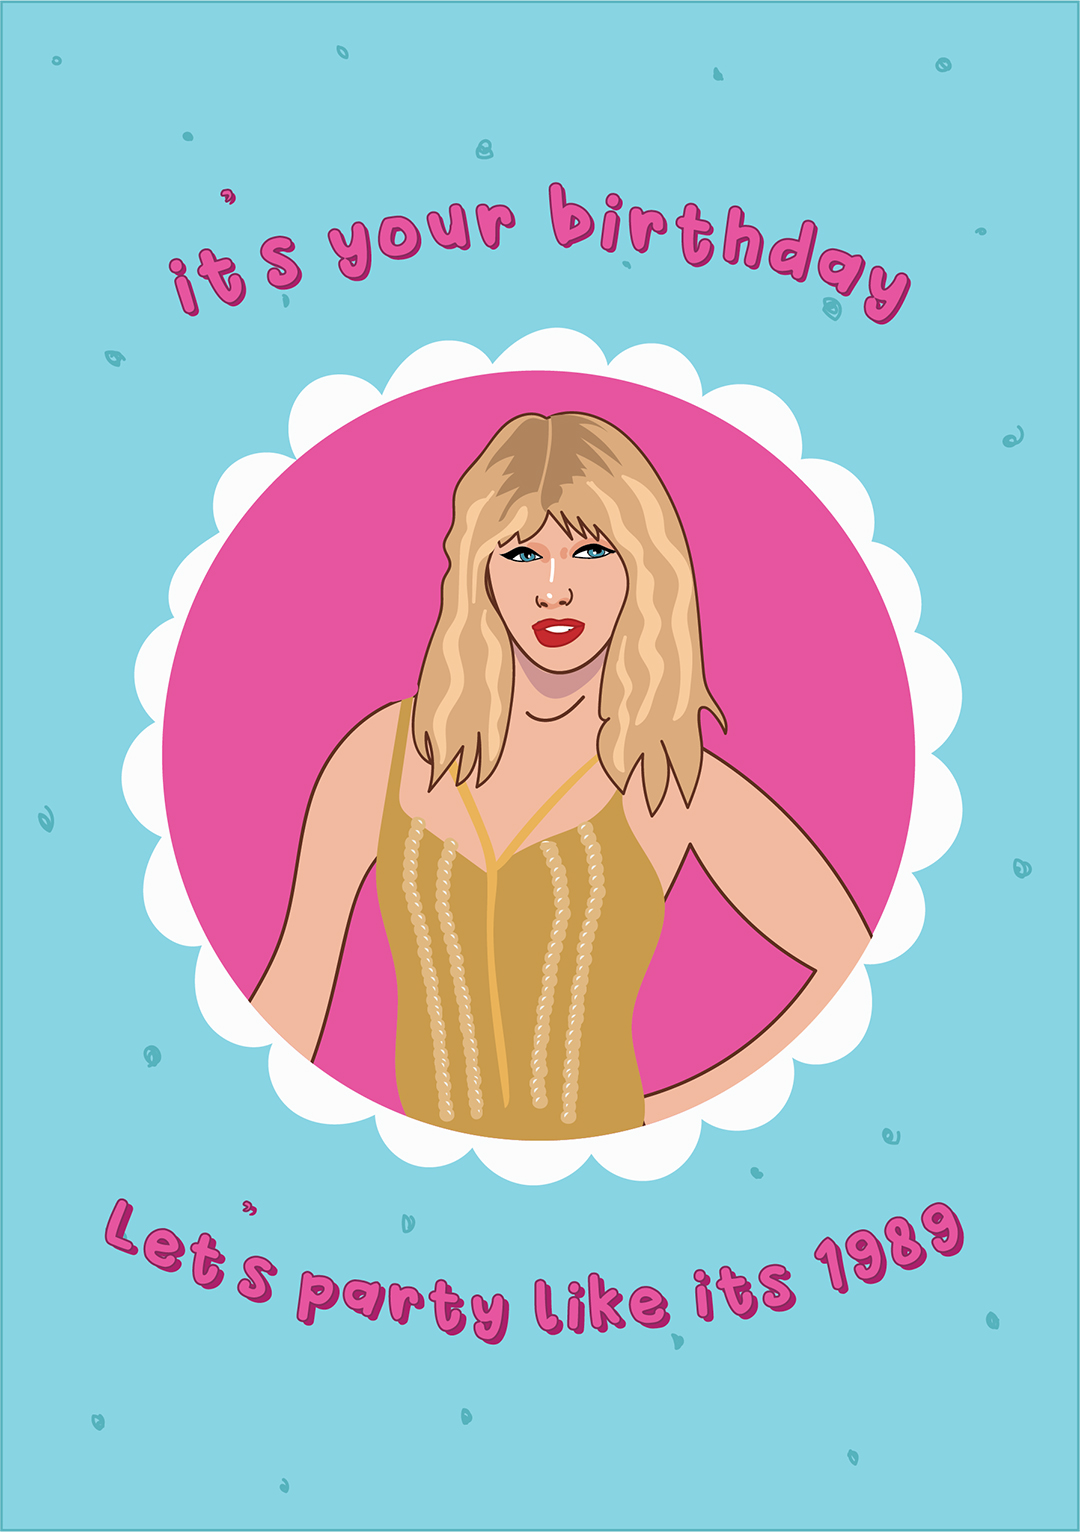 It's Your Birthday! Let's Party Like It's 1989